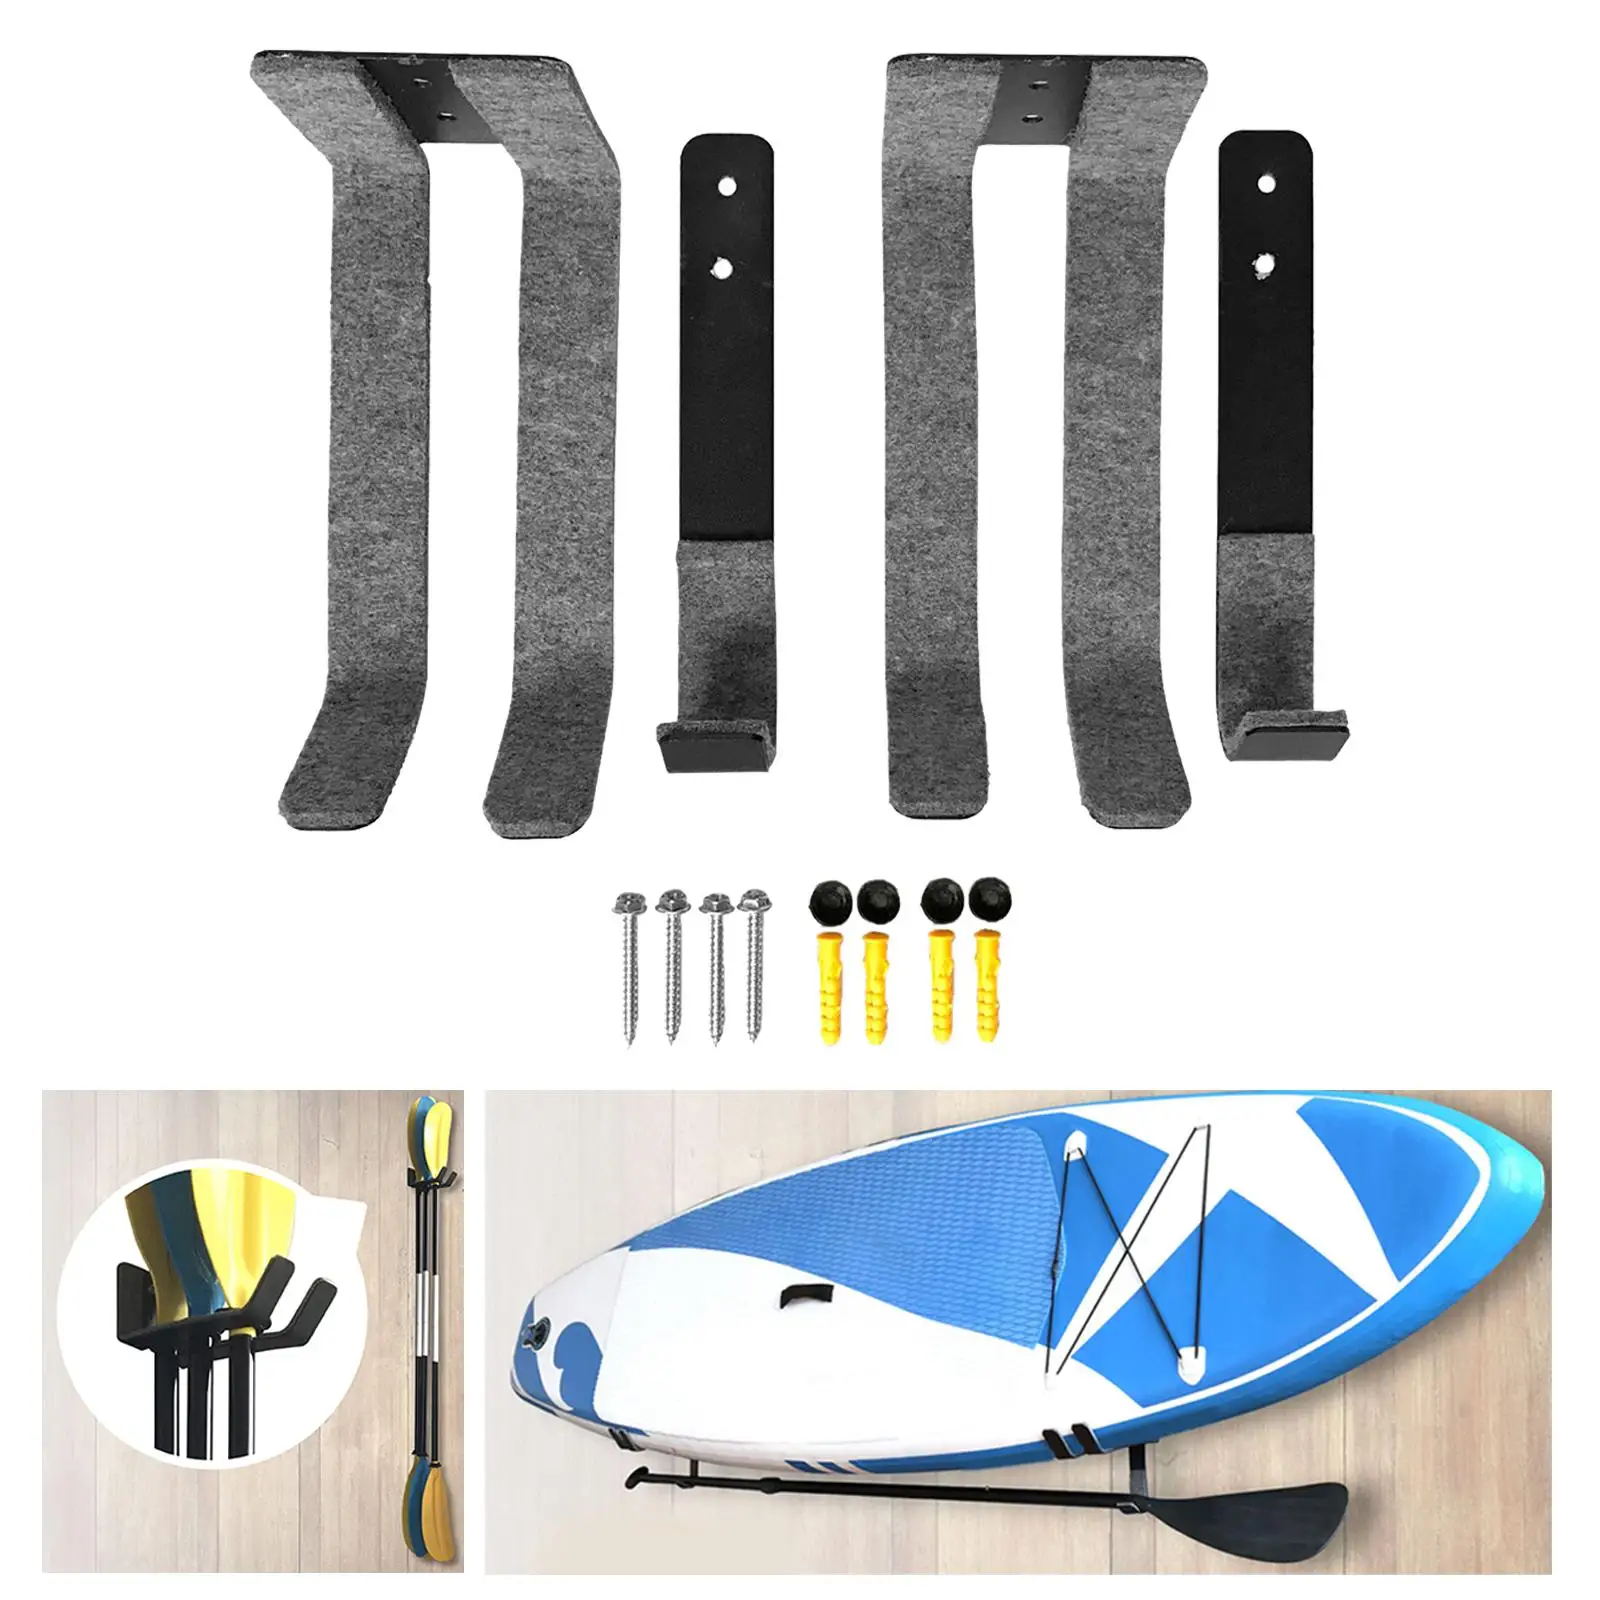 Aluminum Surf Board Rack Surfboard Storage Supplies Holds Both Long Boards and